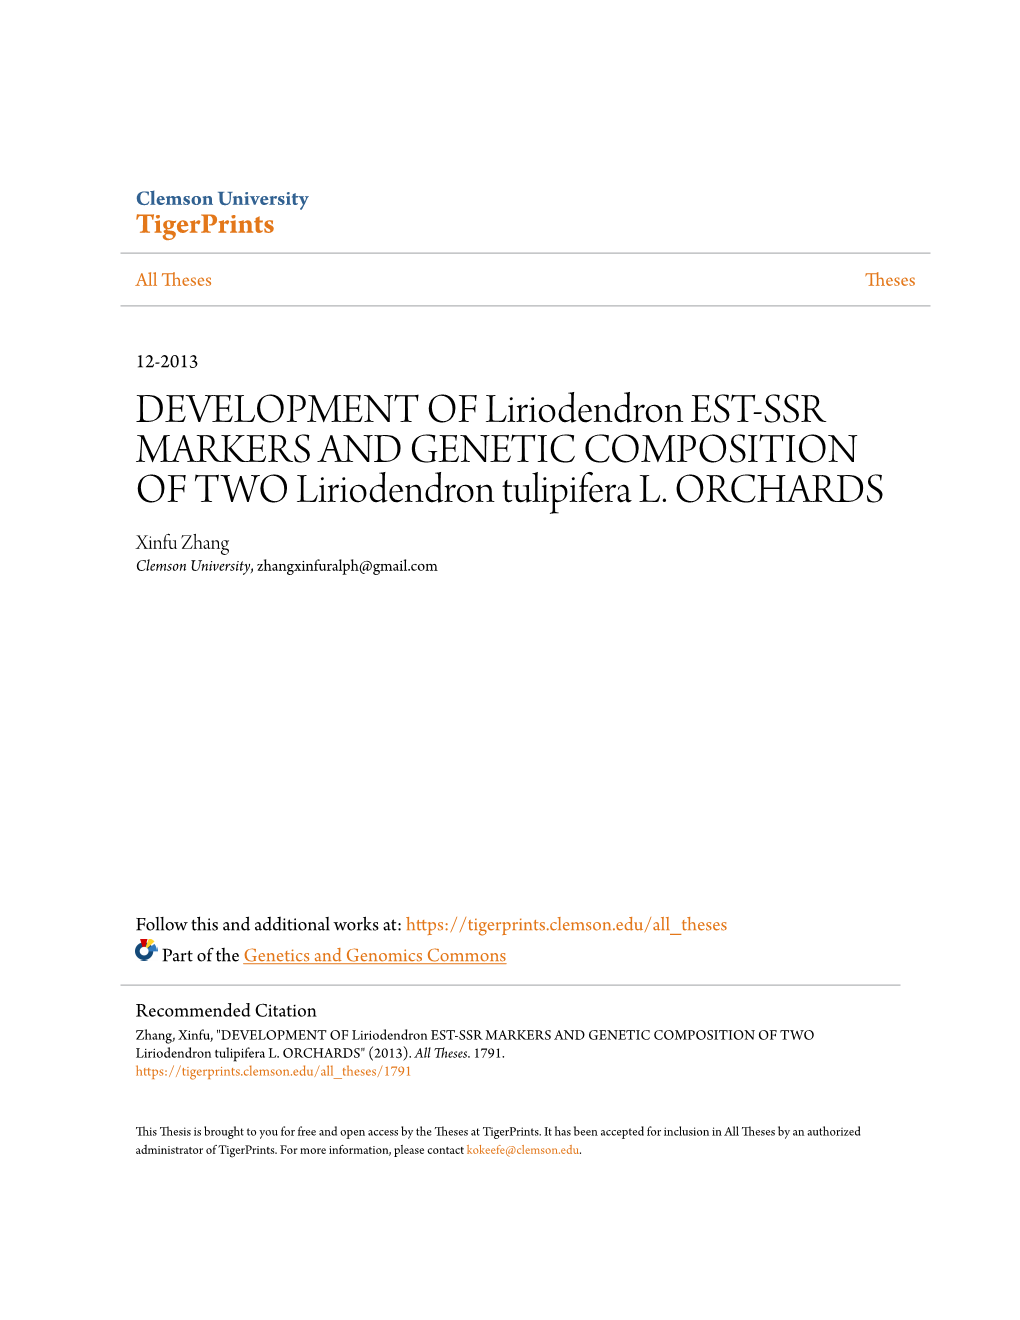 DEVELOPMENT of Liriodendron EST-SSR MARKERS and GENETIC COMPOSITION of TWO Liriodendron Tulipifera L